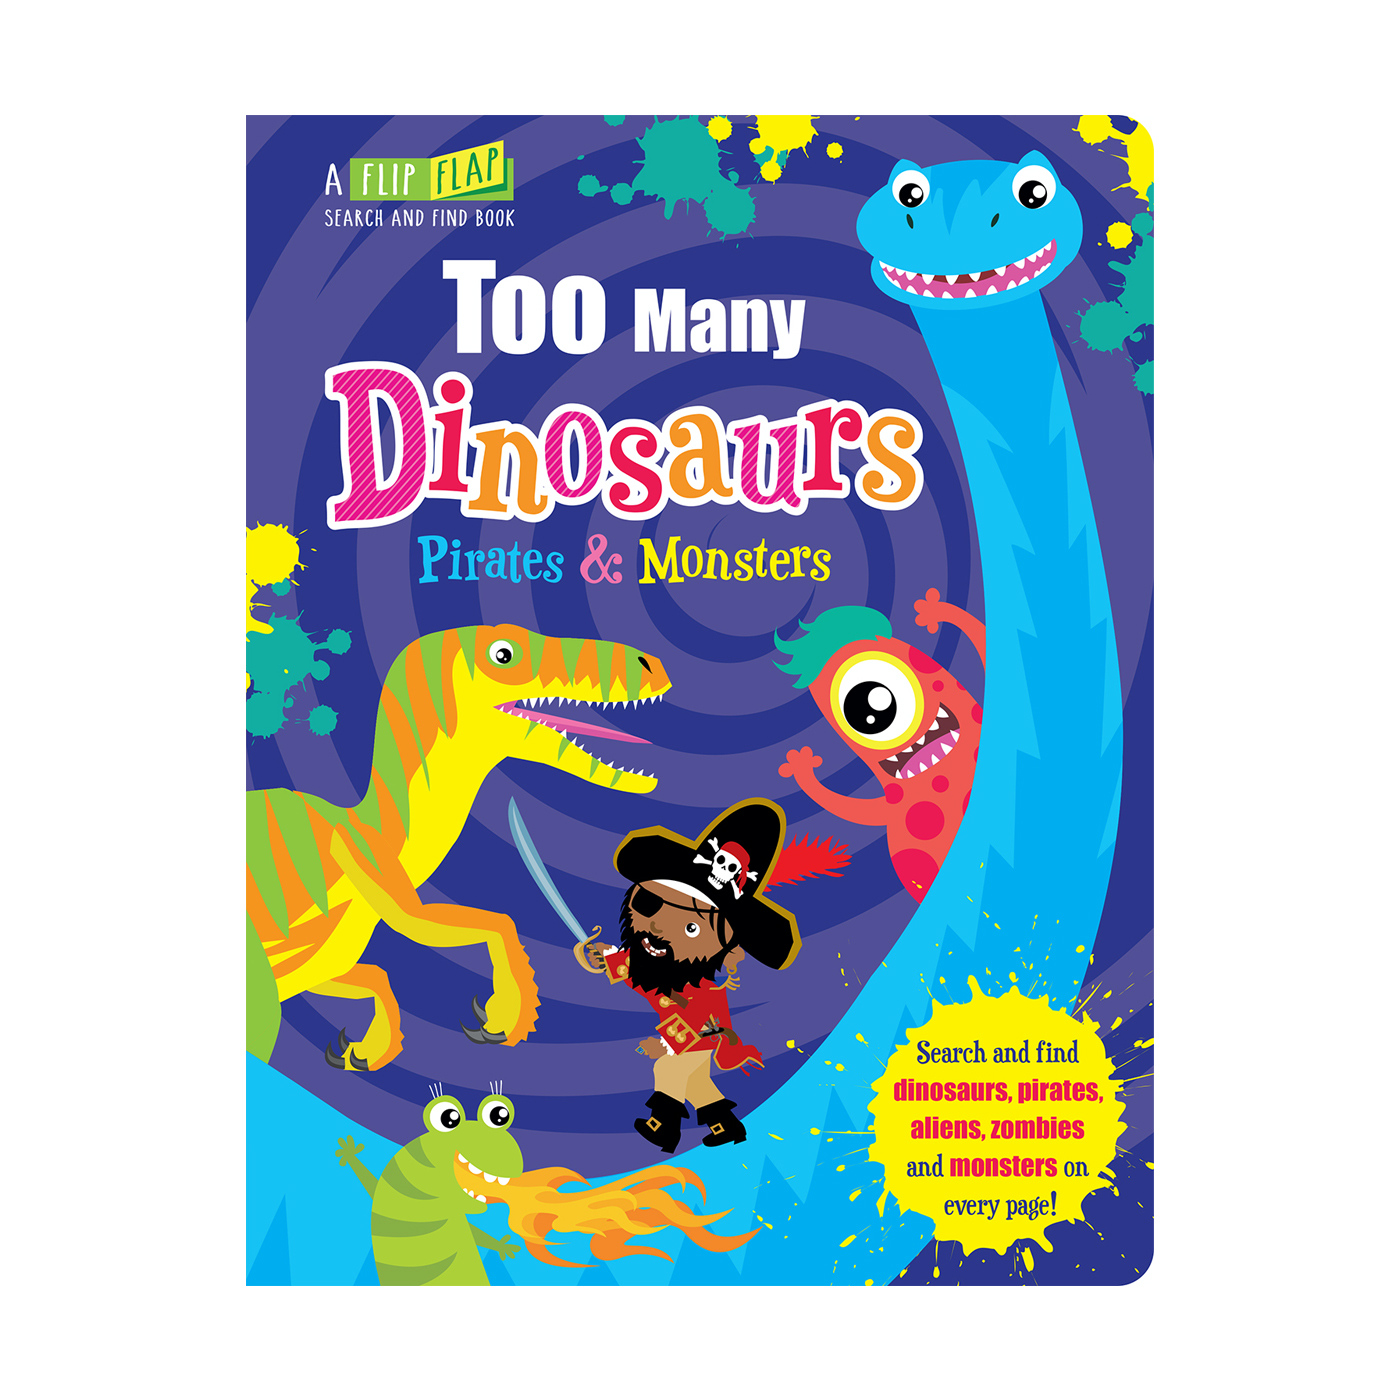  Too Many Dinosaurs, Pirates & Monsters